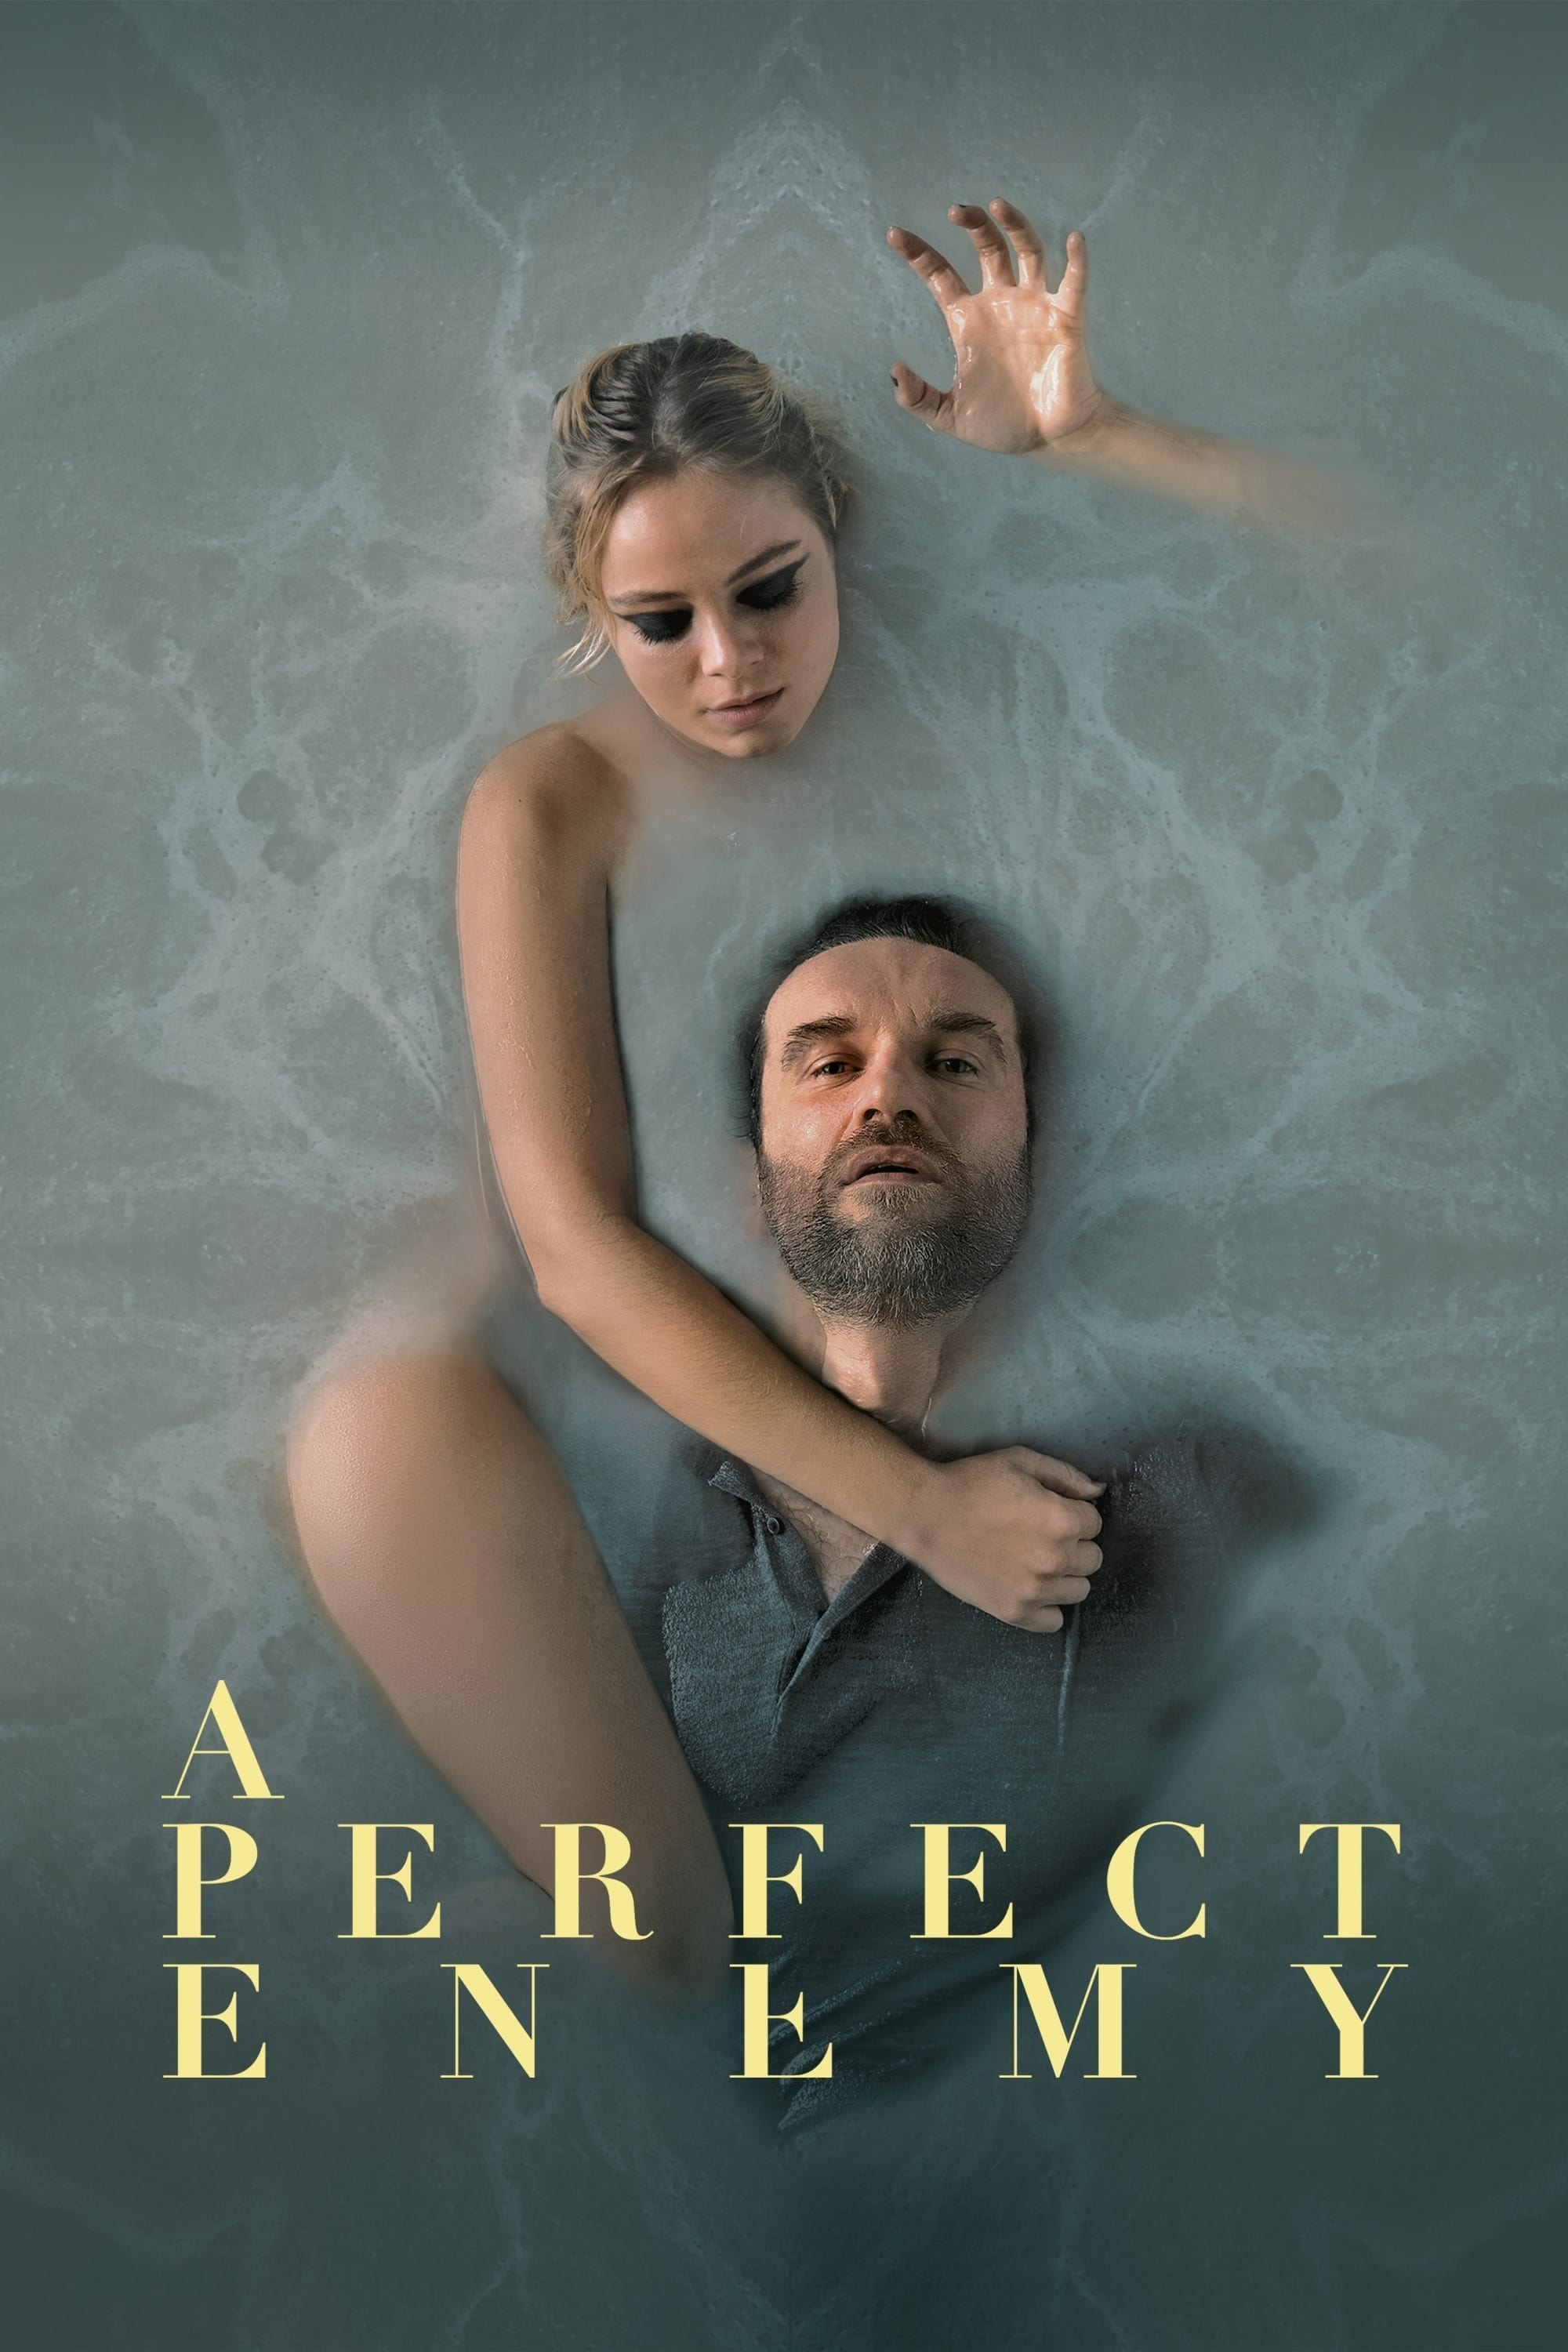 A Perfect Enemy (A Perfect Enemy) [2021]